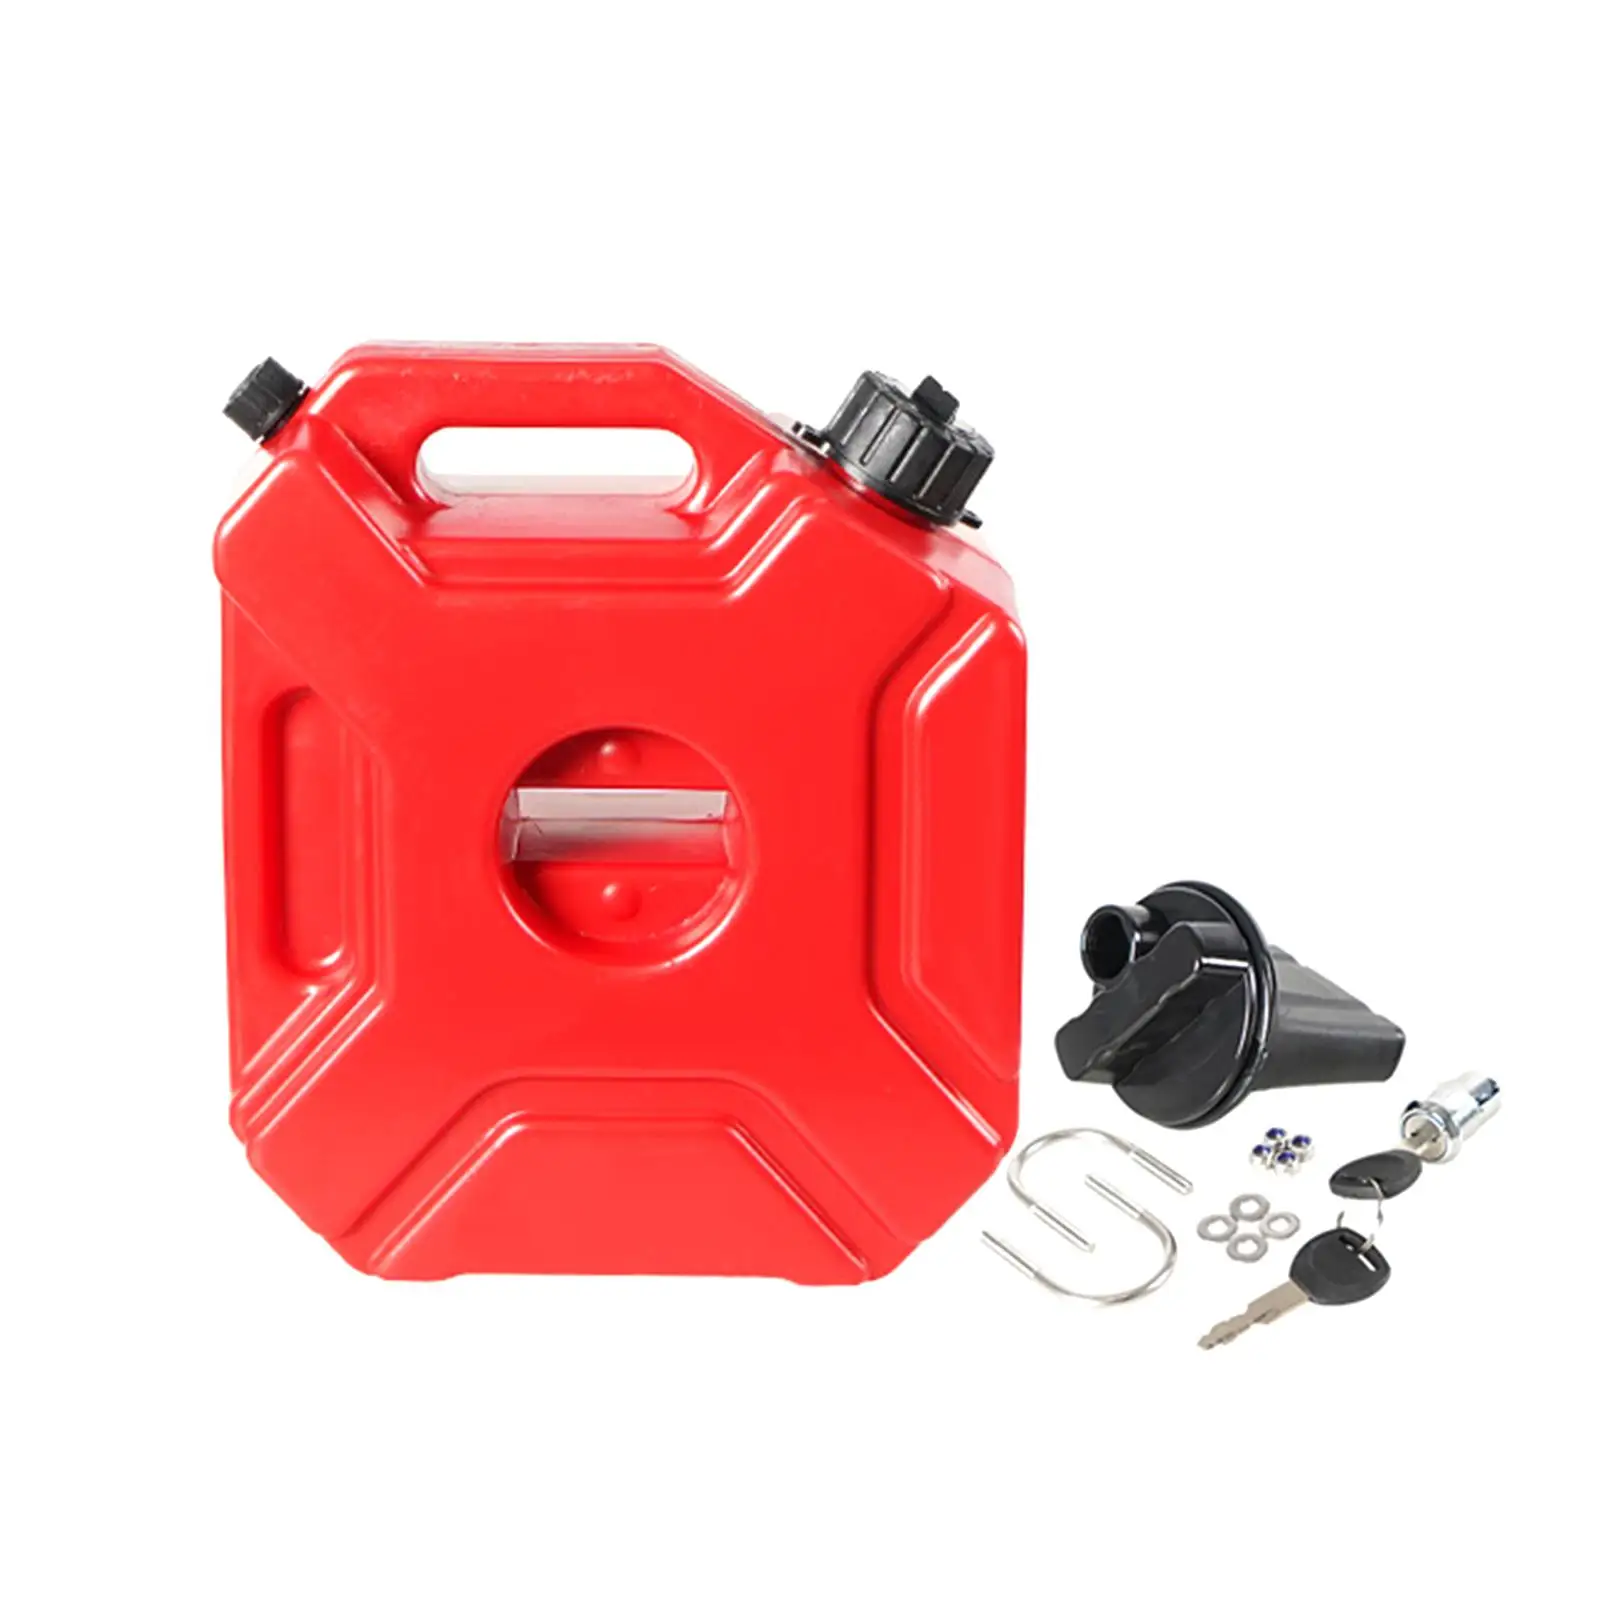 Petrol Tanks 5L with Lock Portable Gasoline Tank Spare Tank Fuel Container for Car Travel Automotive SUV Motocross Parts